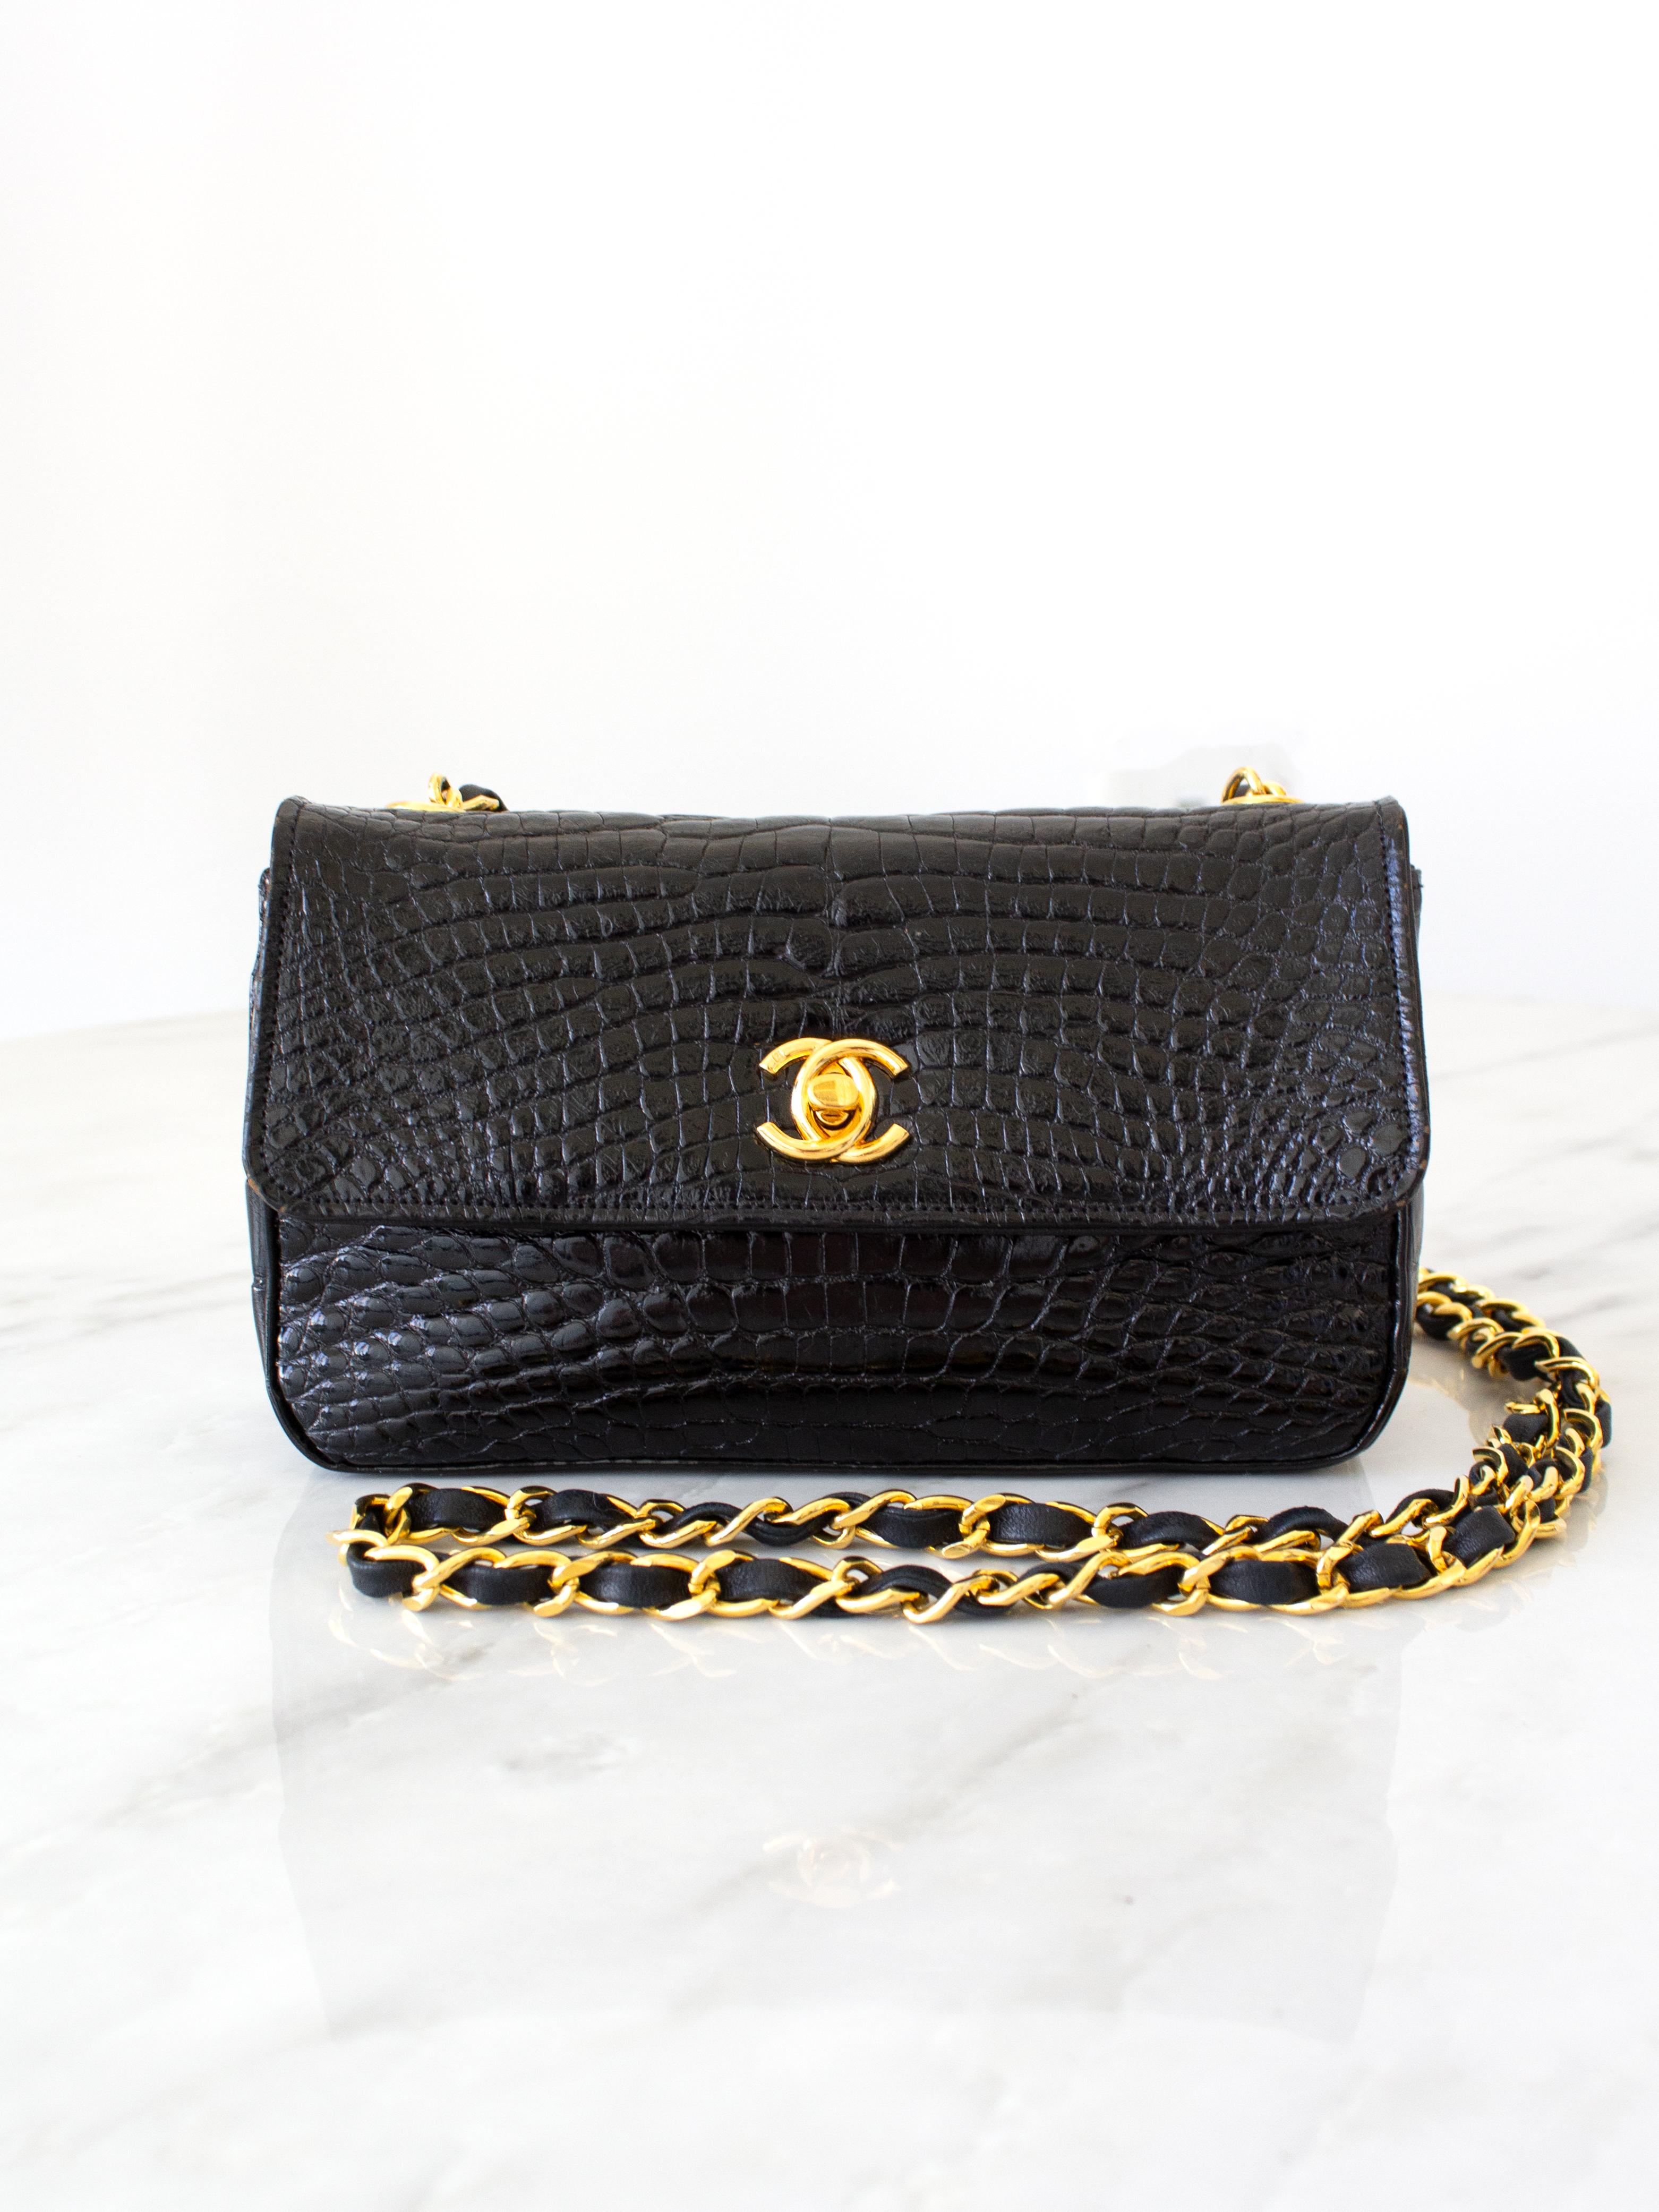 Introducing vintage Chanel classic mini flap from 1989. Crafted from luxurious black alligator leather and adorned with exquisite 24K Métal Doré Plaqué hardware ( Classic Gold Heavy Plated- Purest ), this piece exudes sophistication. A true